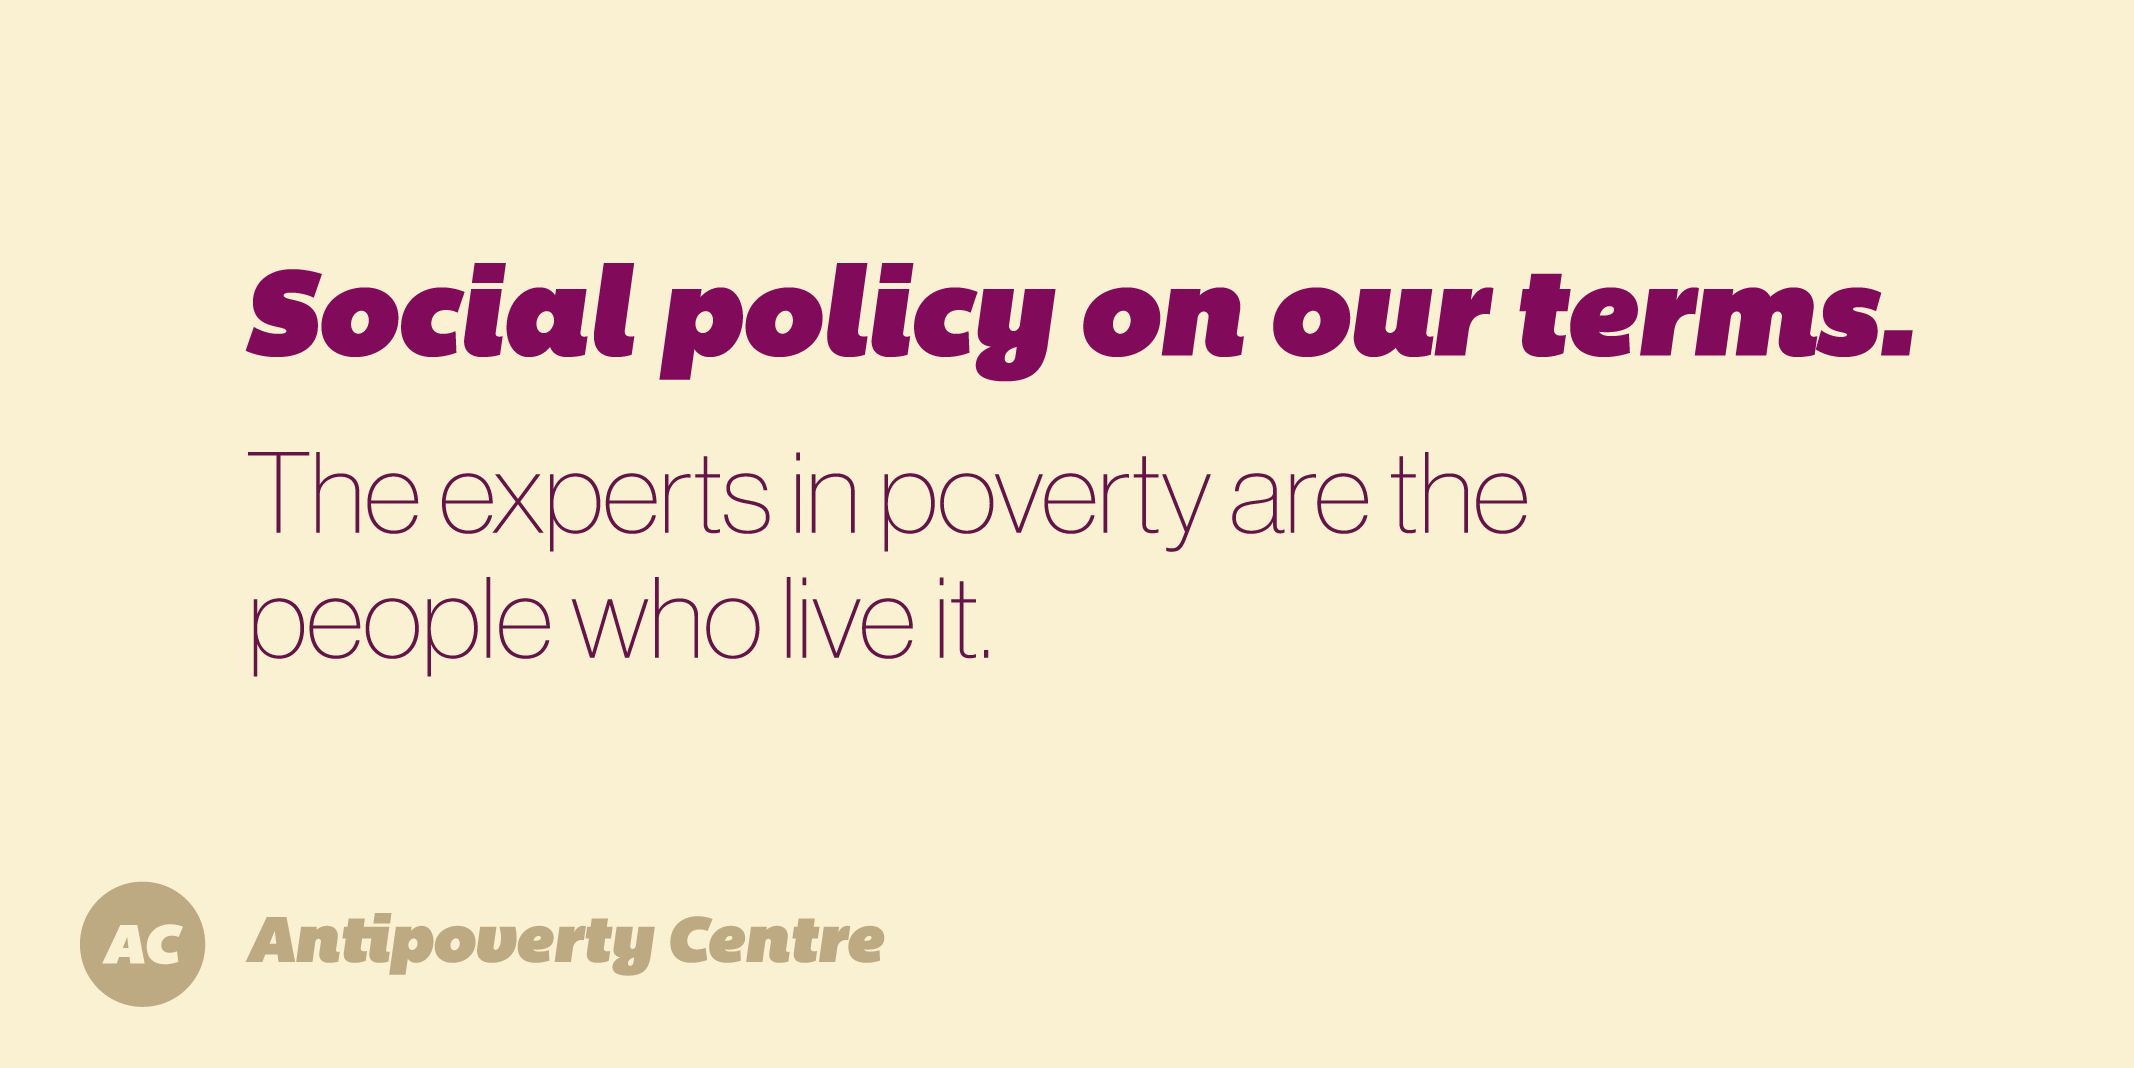 Social policy on our terms. The experts in poverty are the people who live it.